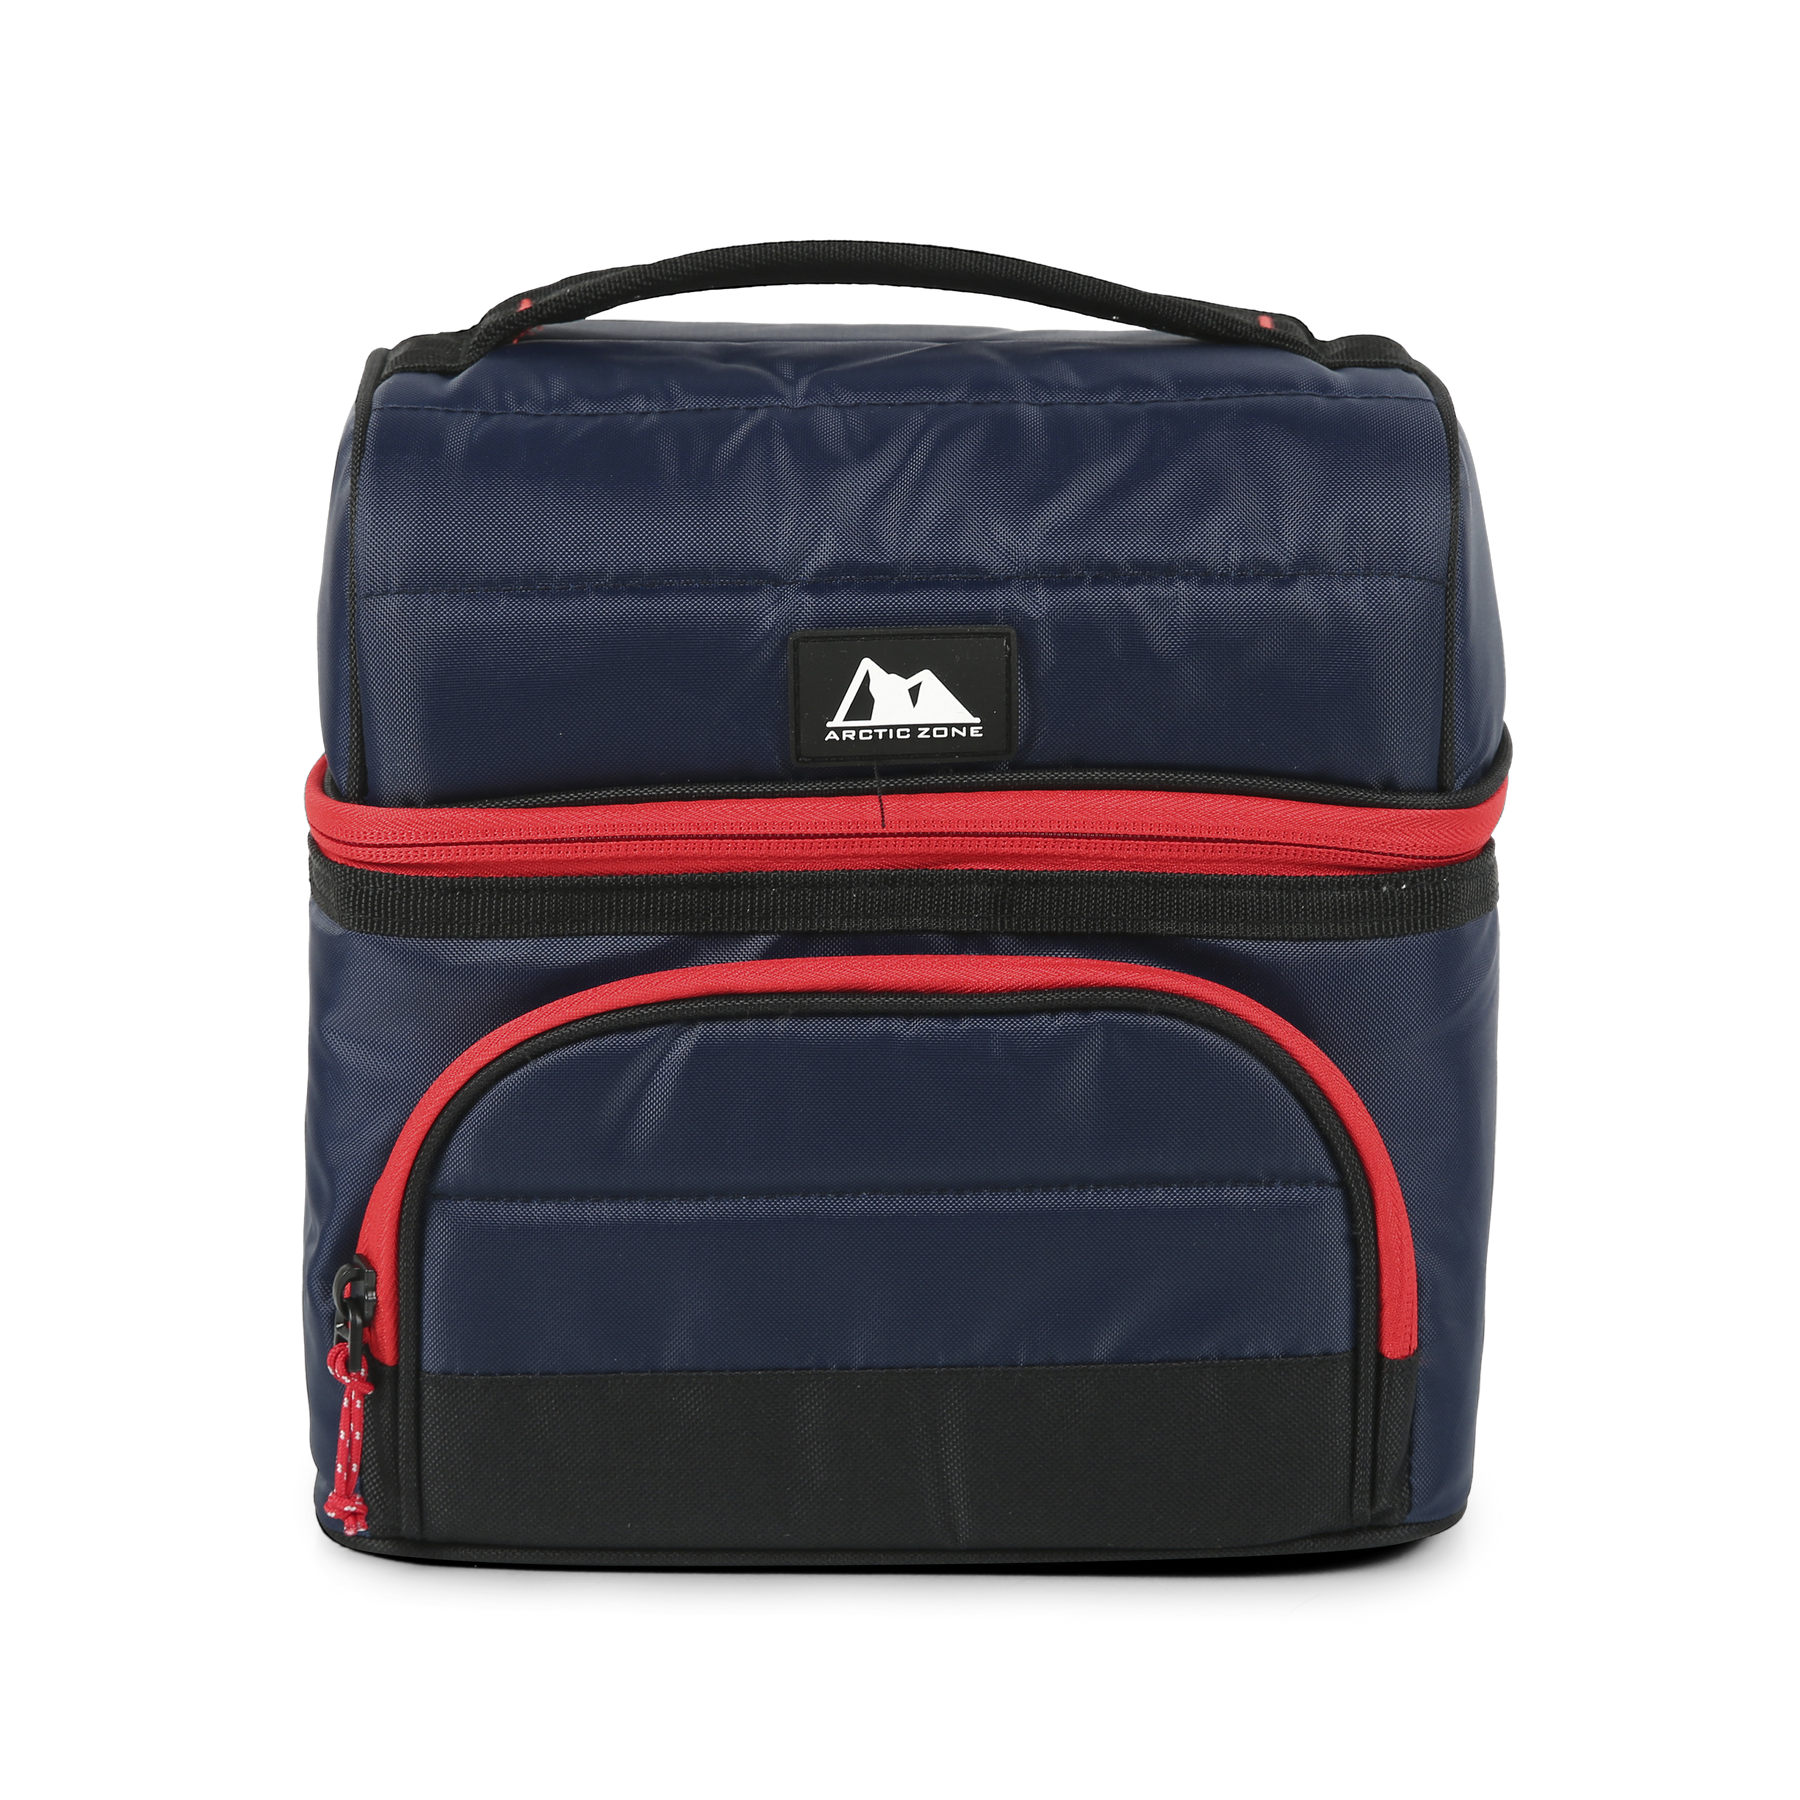 Arctic Zone High Performance Ultimate Secret Insulated Lunch Box Bucket Bag  with 2 Piece Leak Proof …See more Arctic Zone High Performance Ultimate